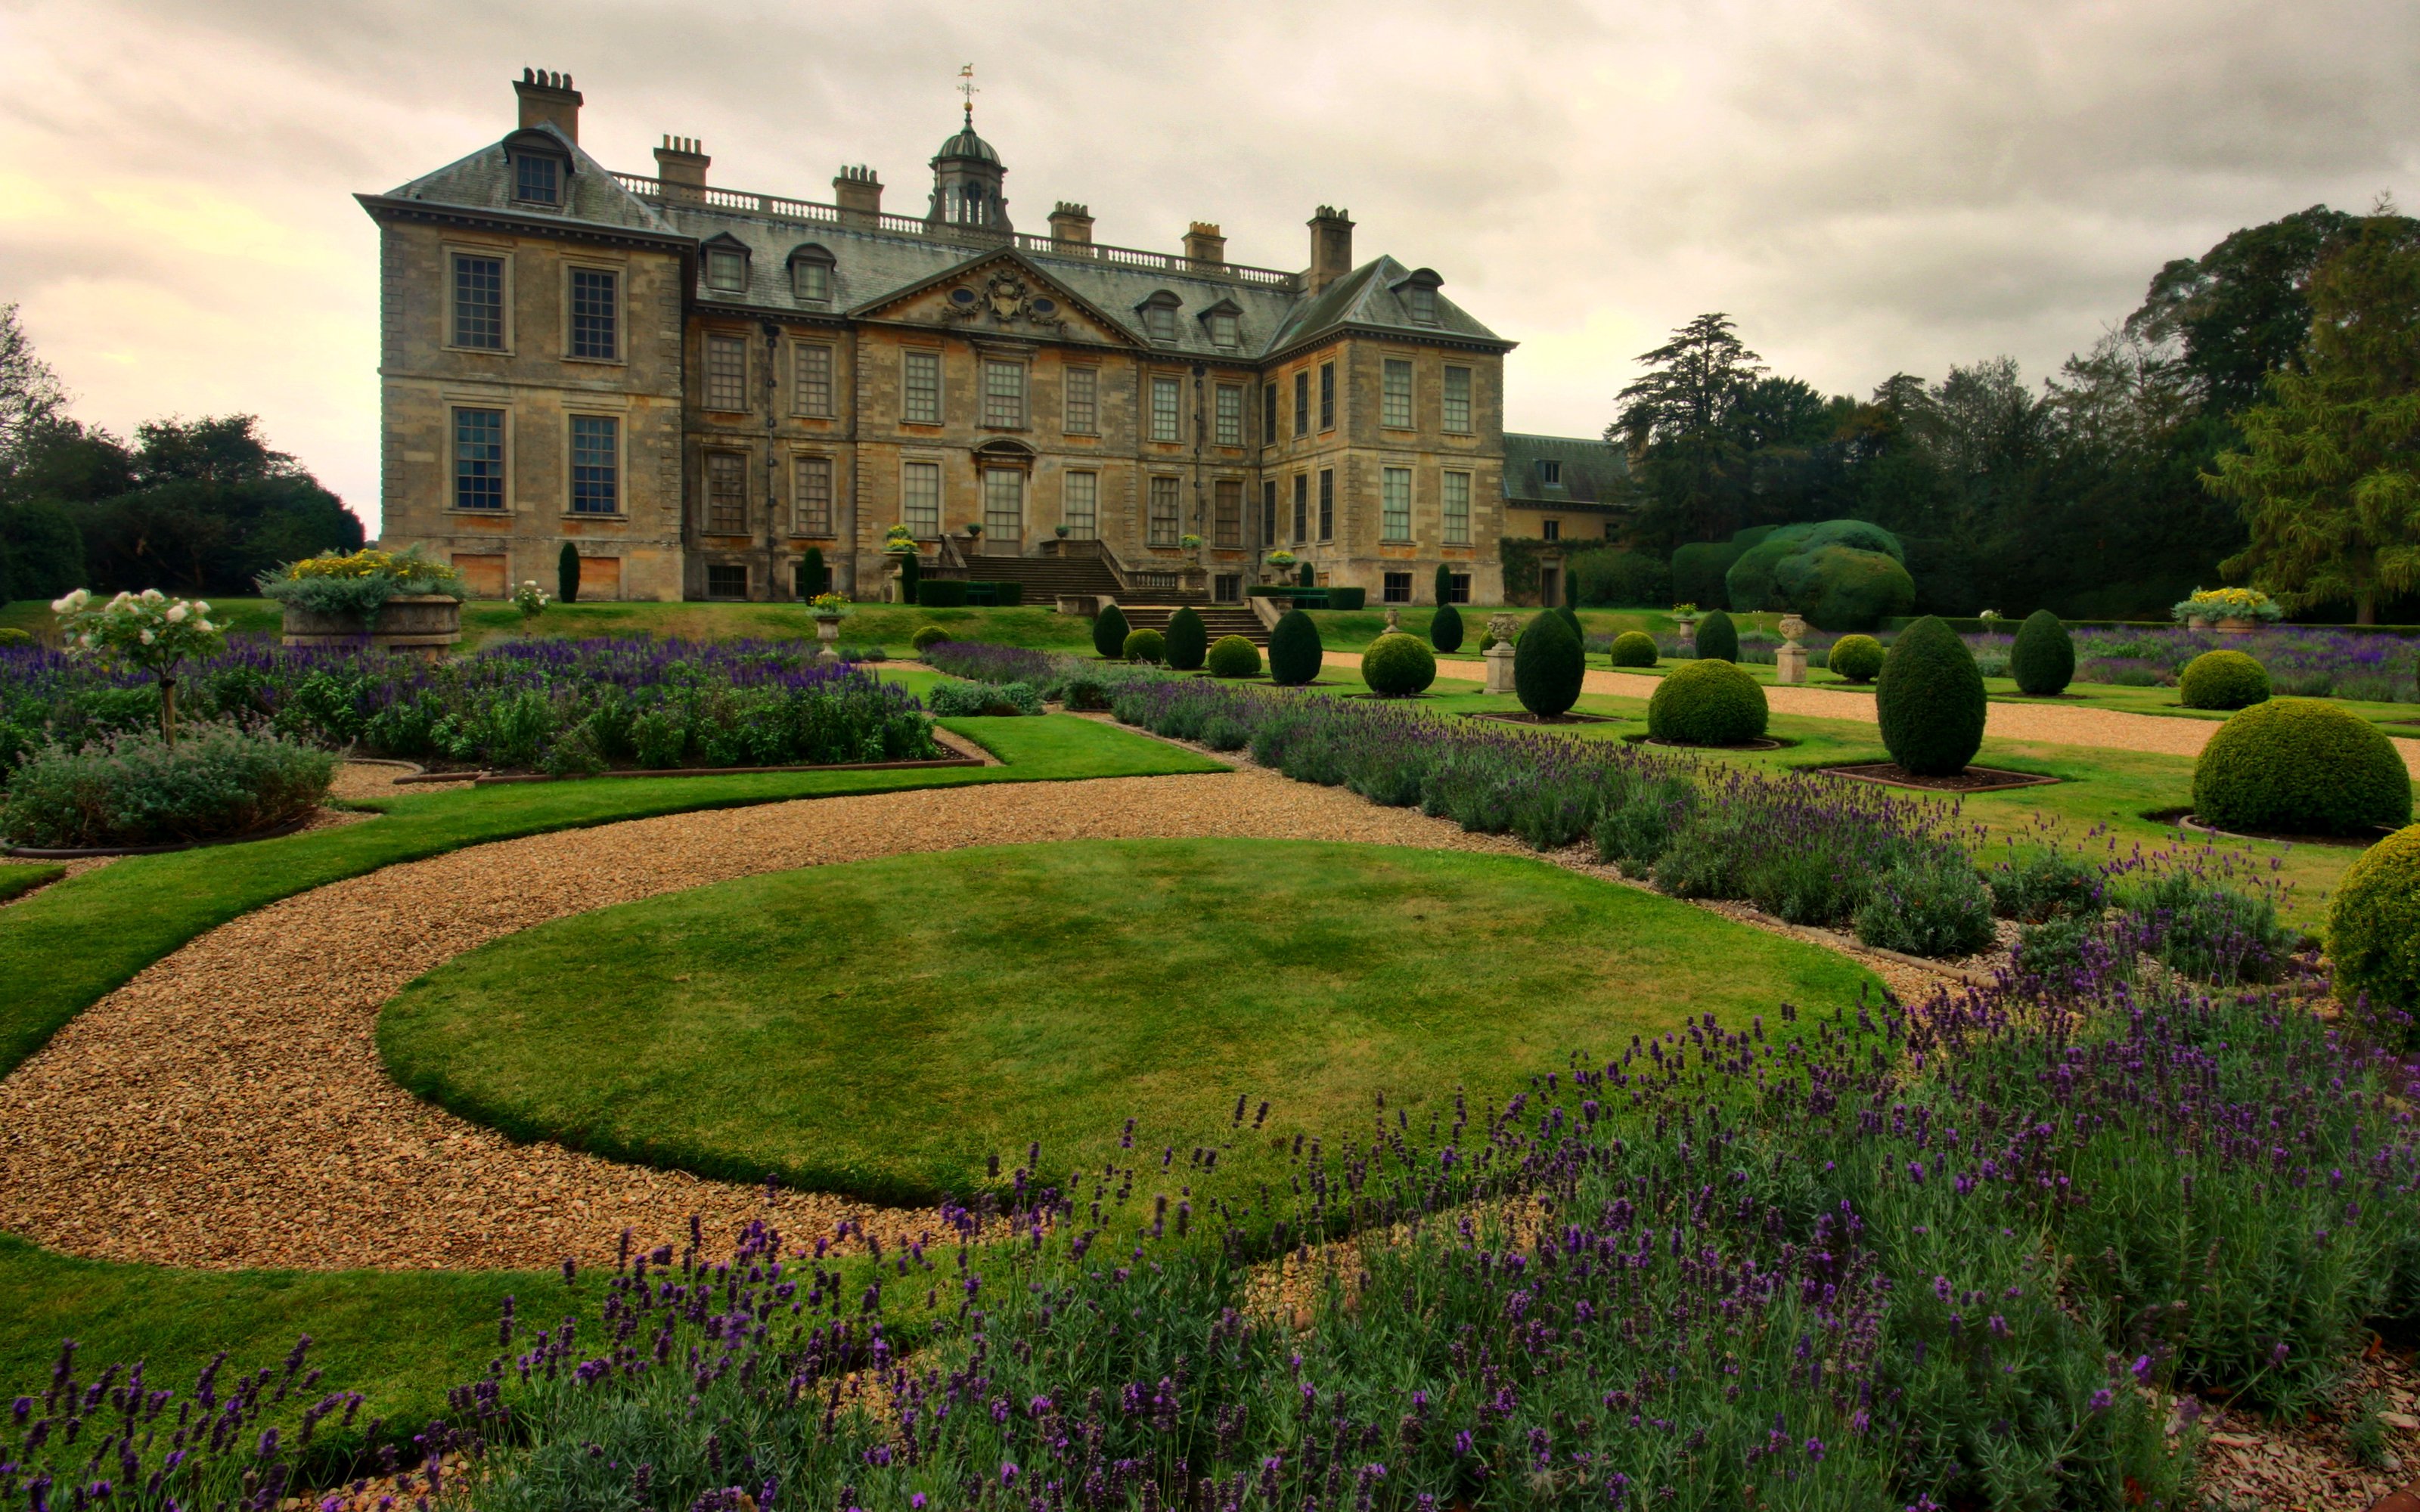 england, Houses, Parks, Shrubs, Lawn, Belton, Lincolnshire, Cities Wallpaper